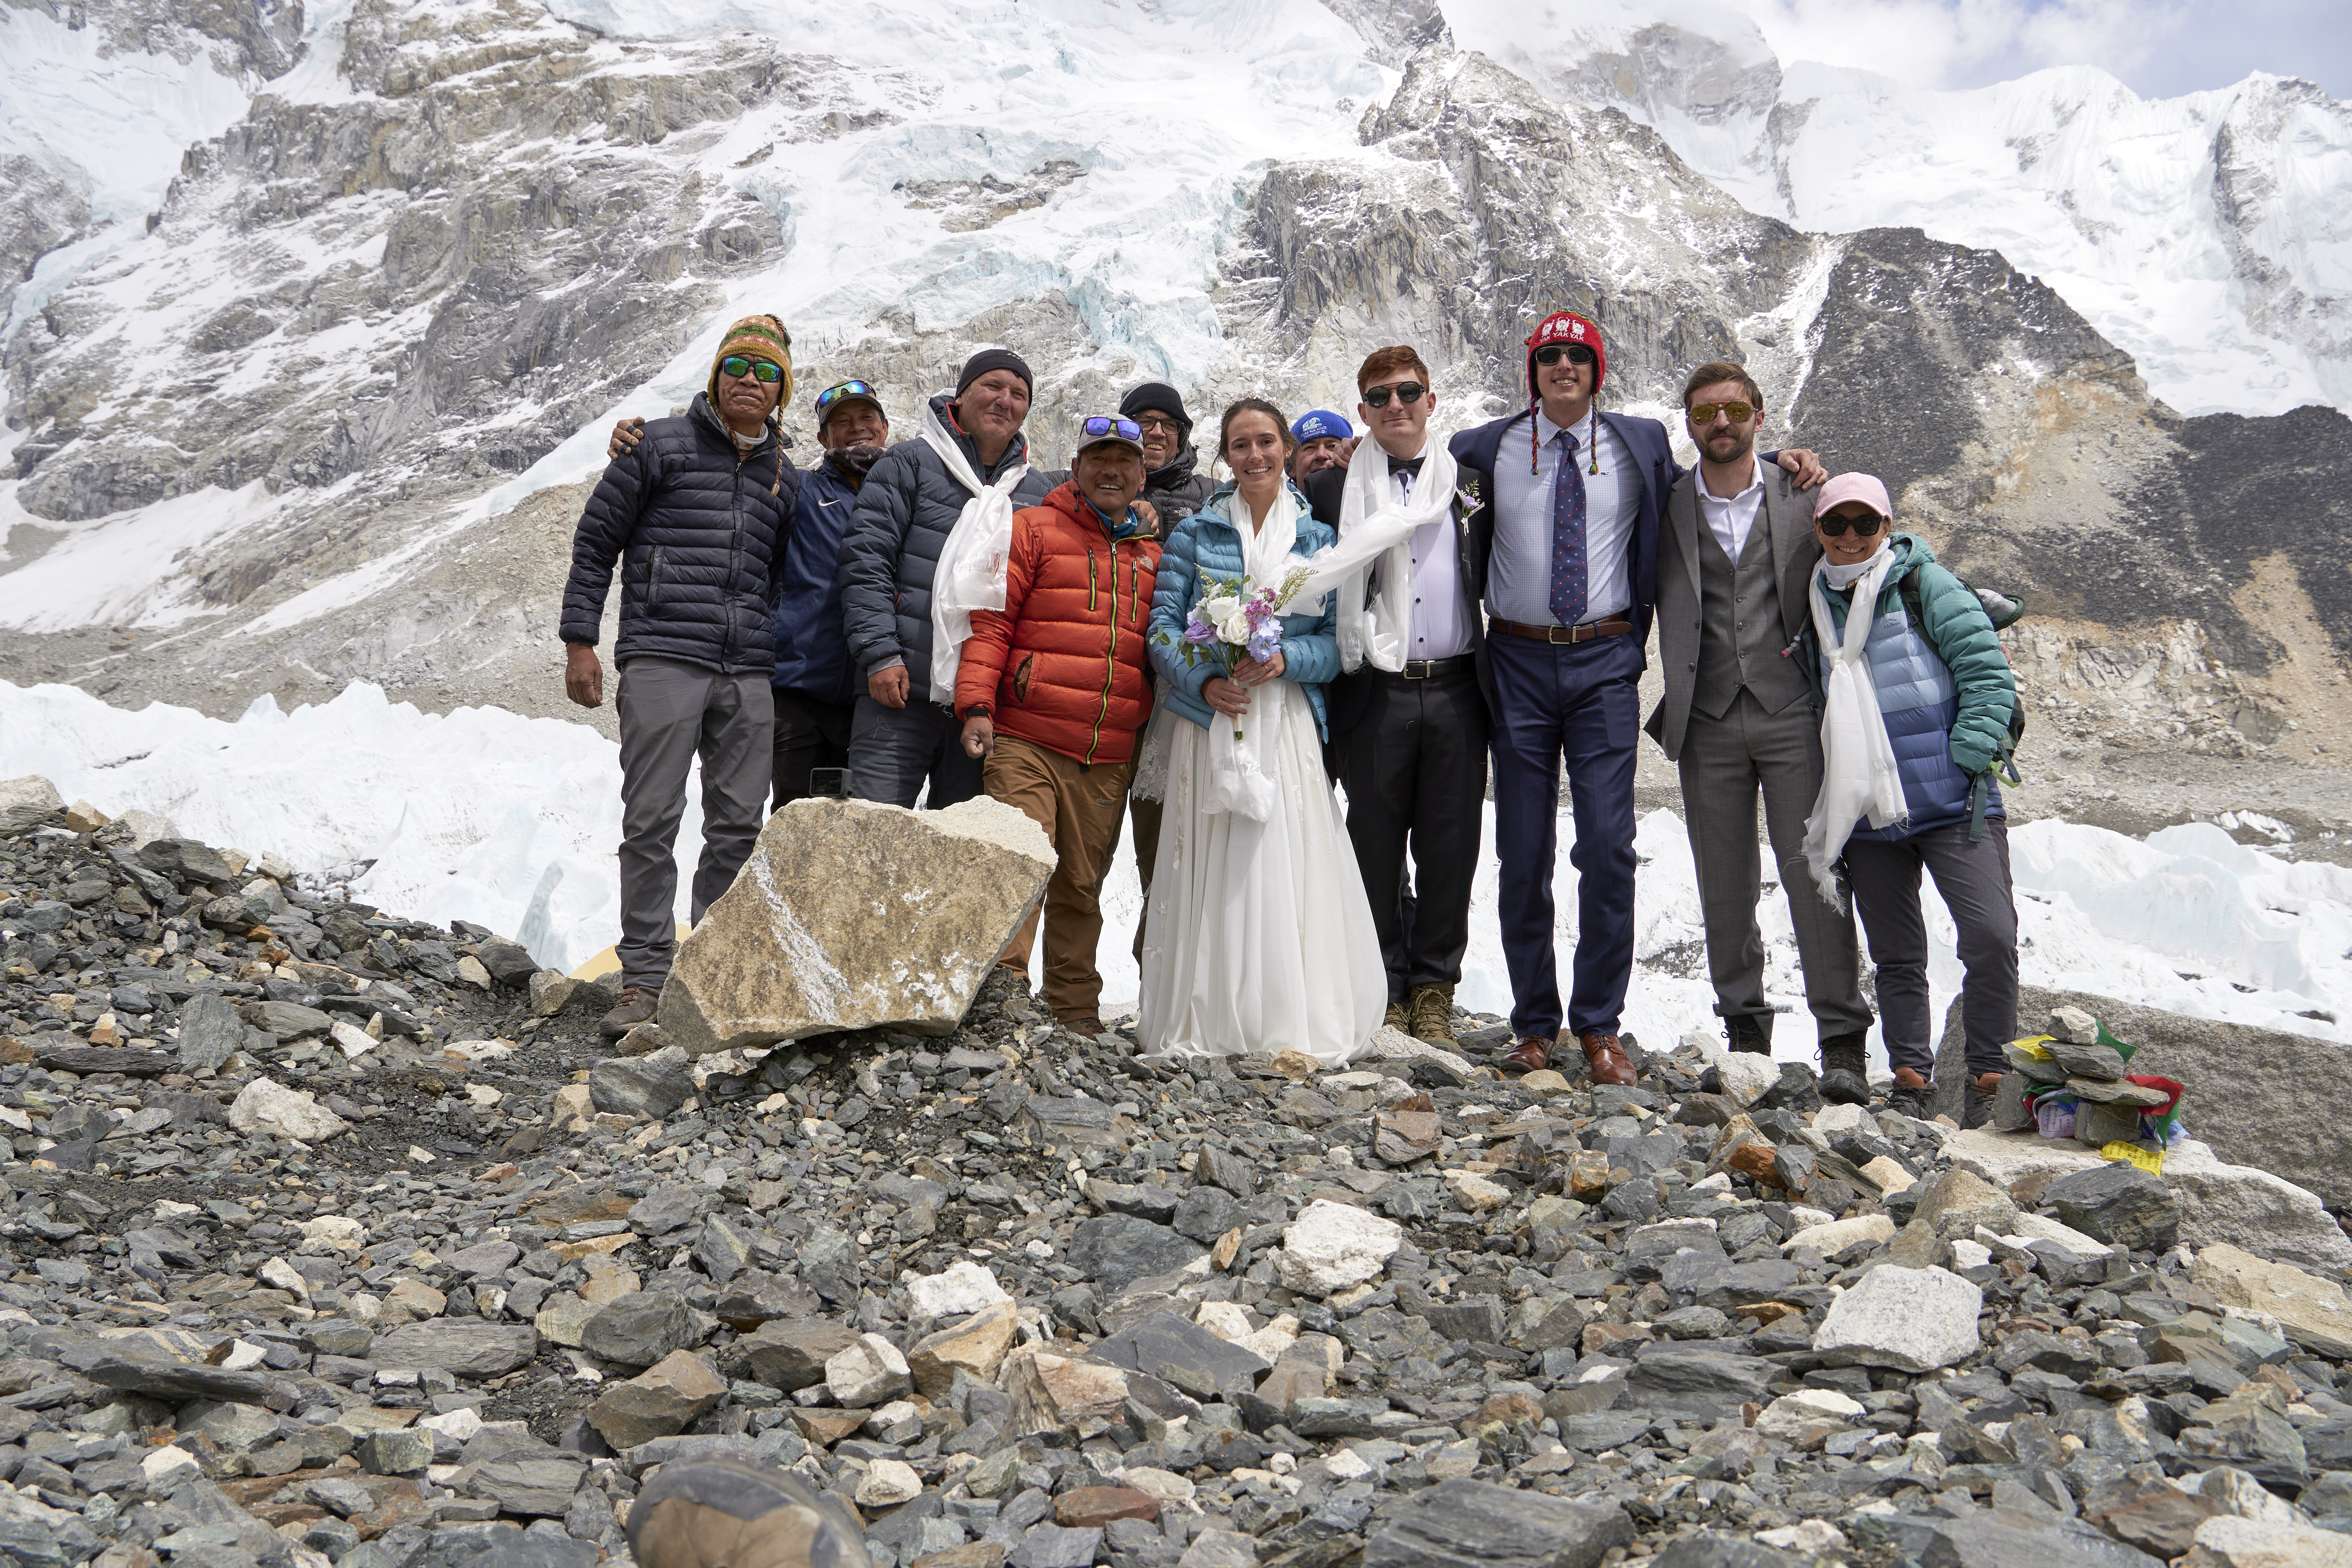 Getting married at Everest Base Camp